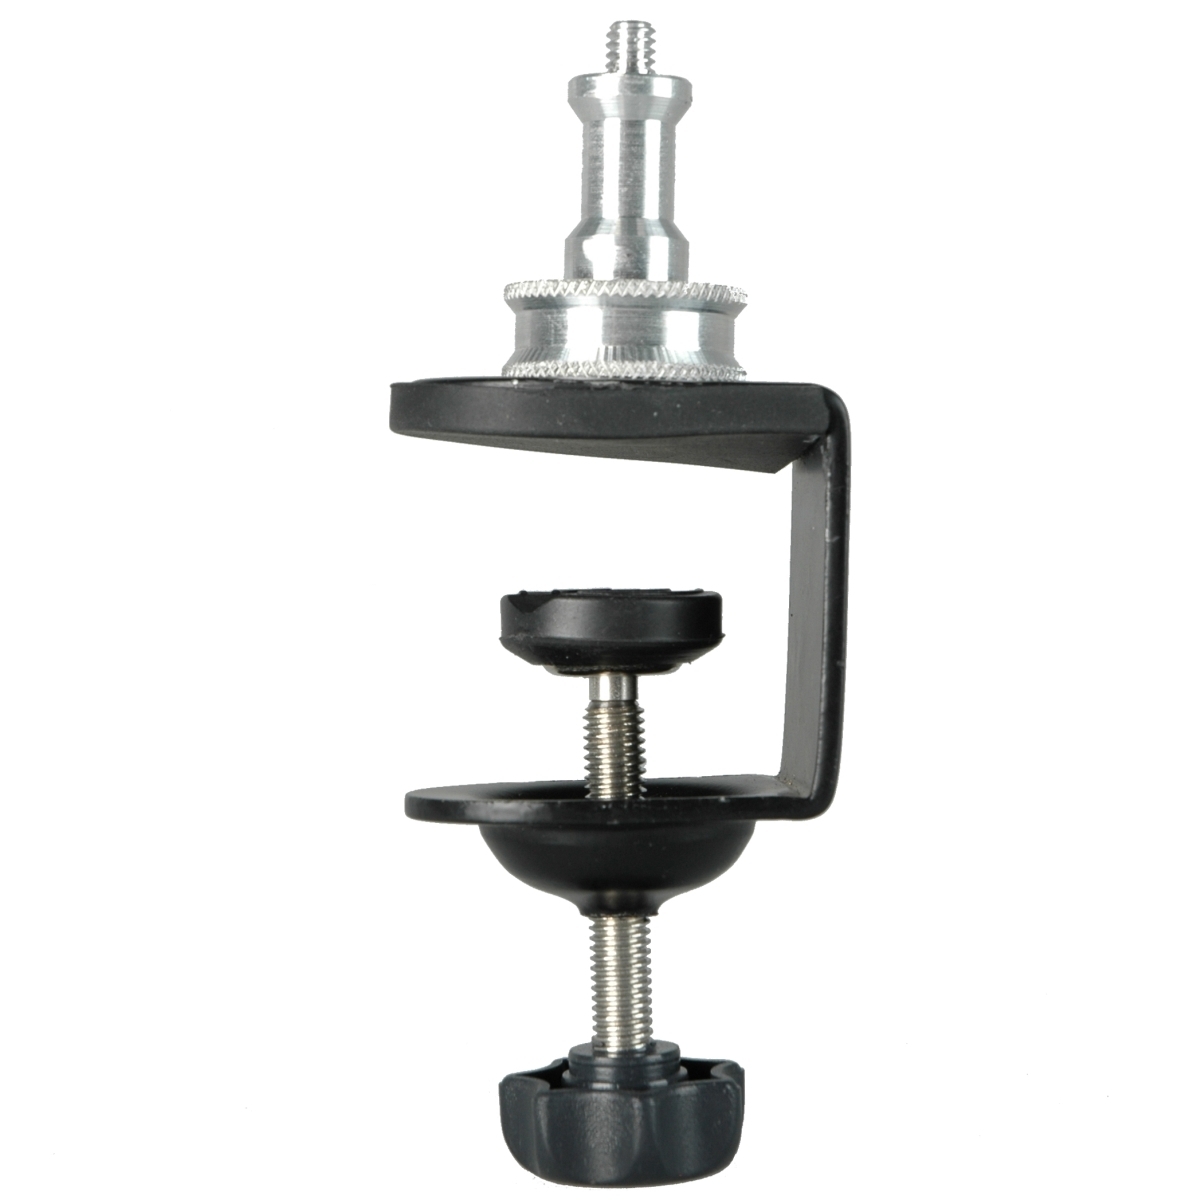 Walimex Special Clamp with Spigot